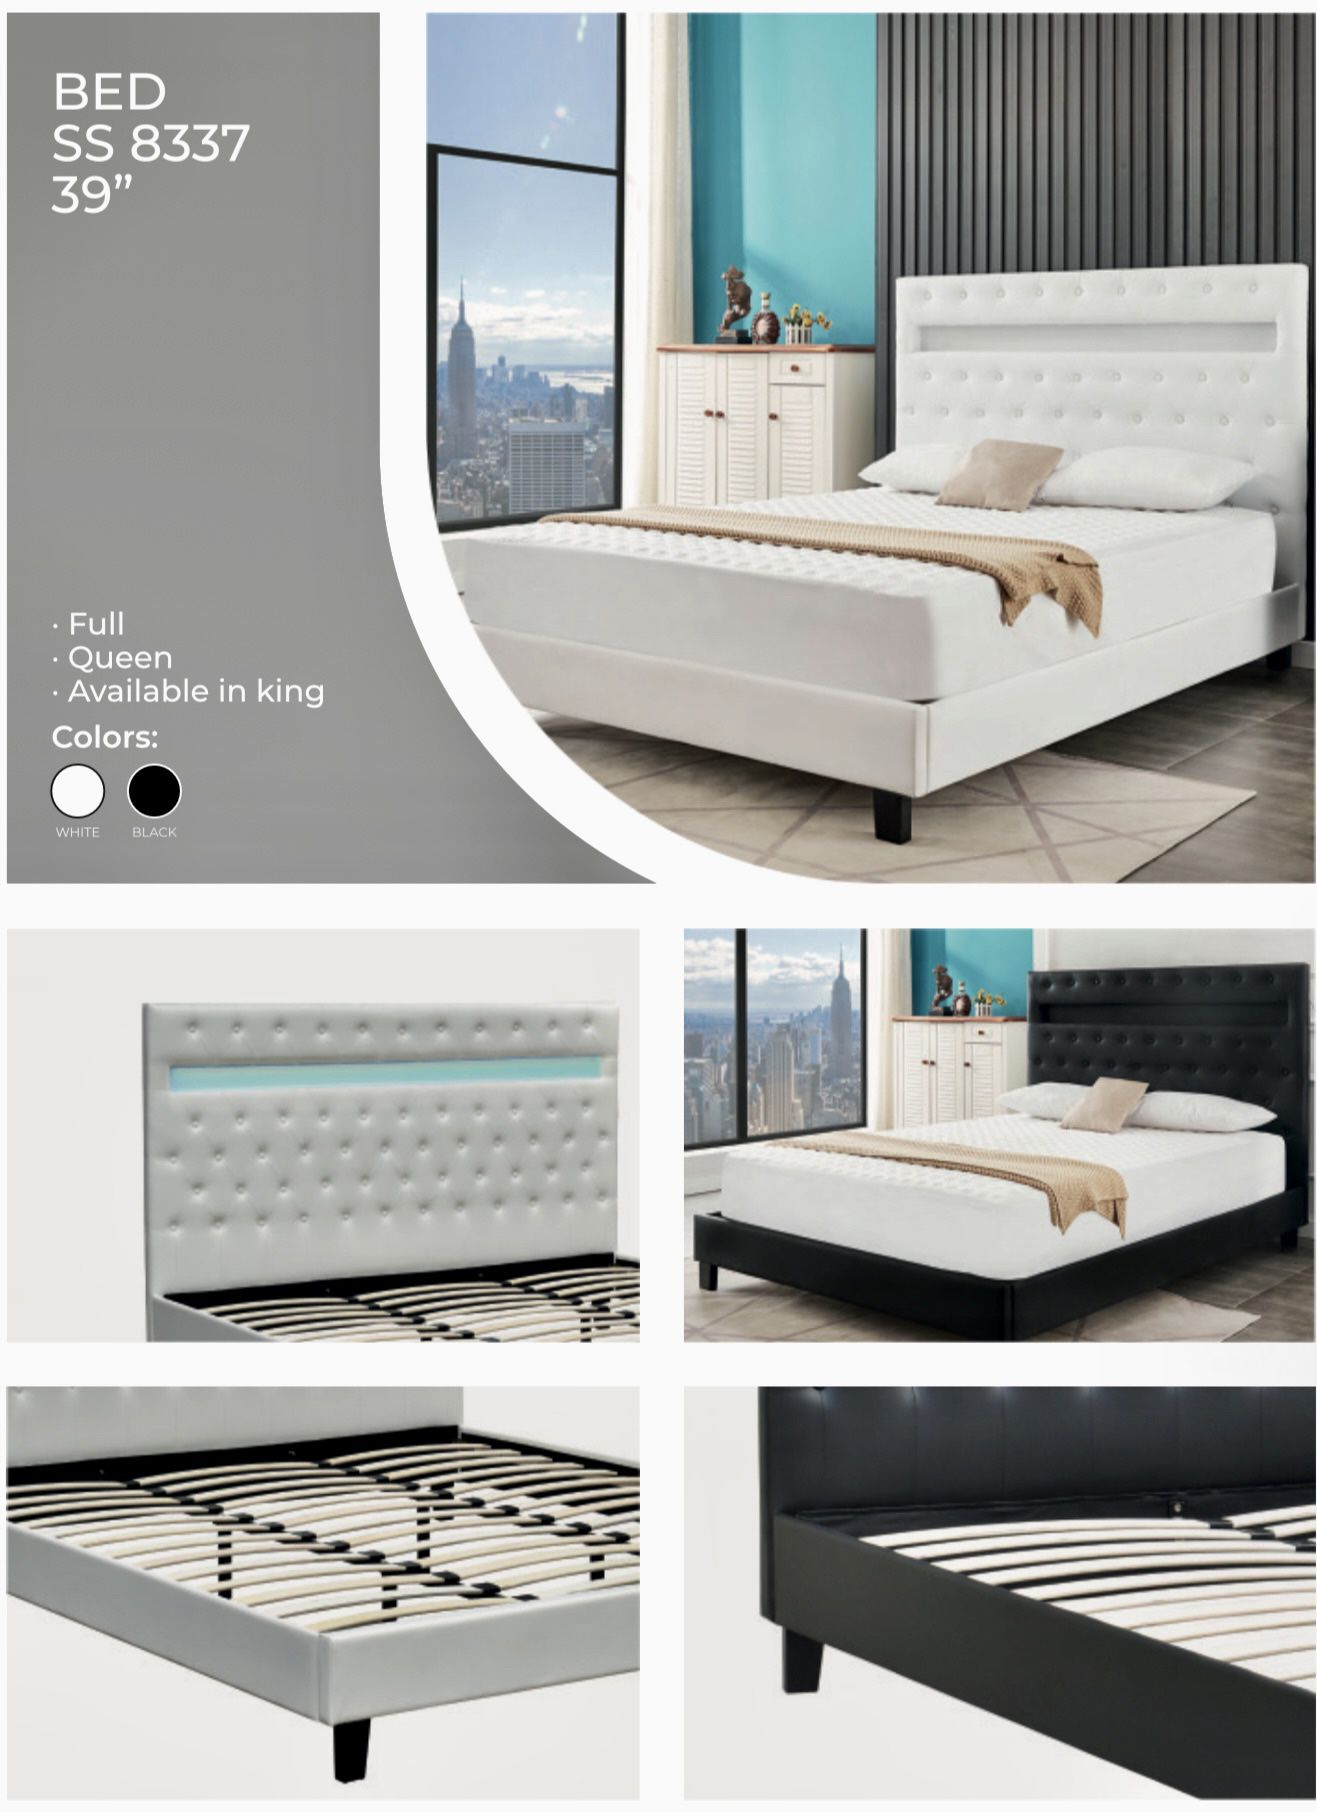 Bed Full , Queen Available !!  Black And White \Cama Full O Queen Size En Negra O Blanca Disponible 